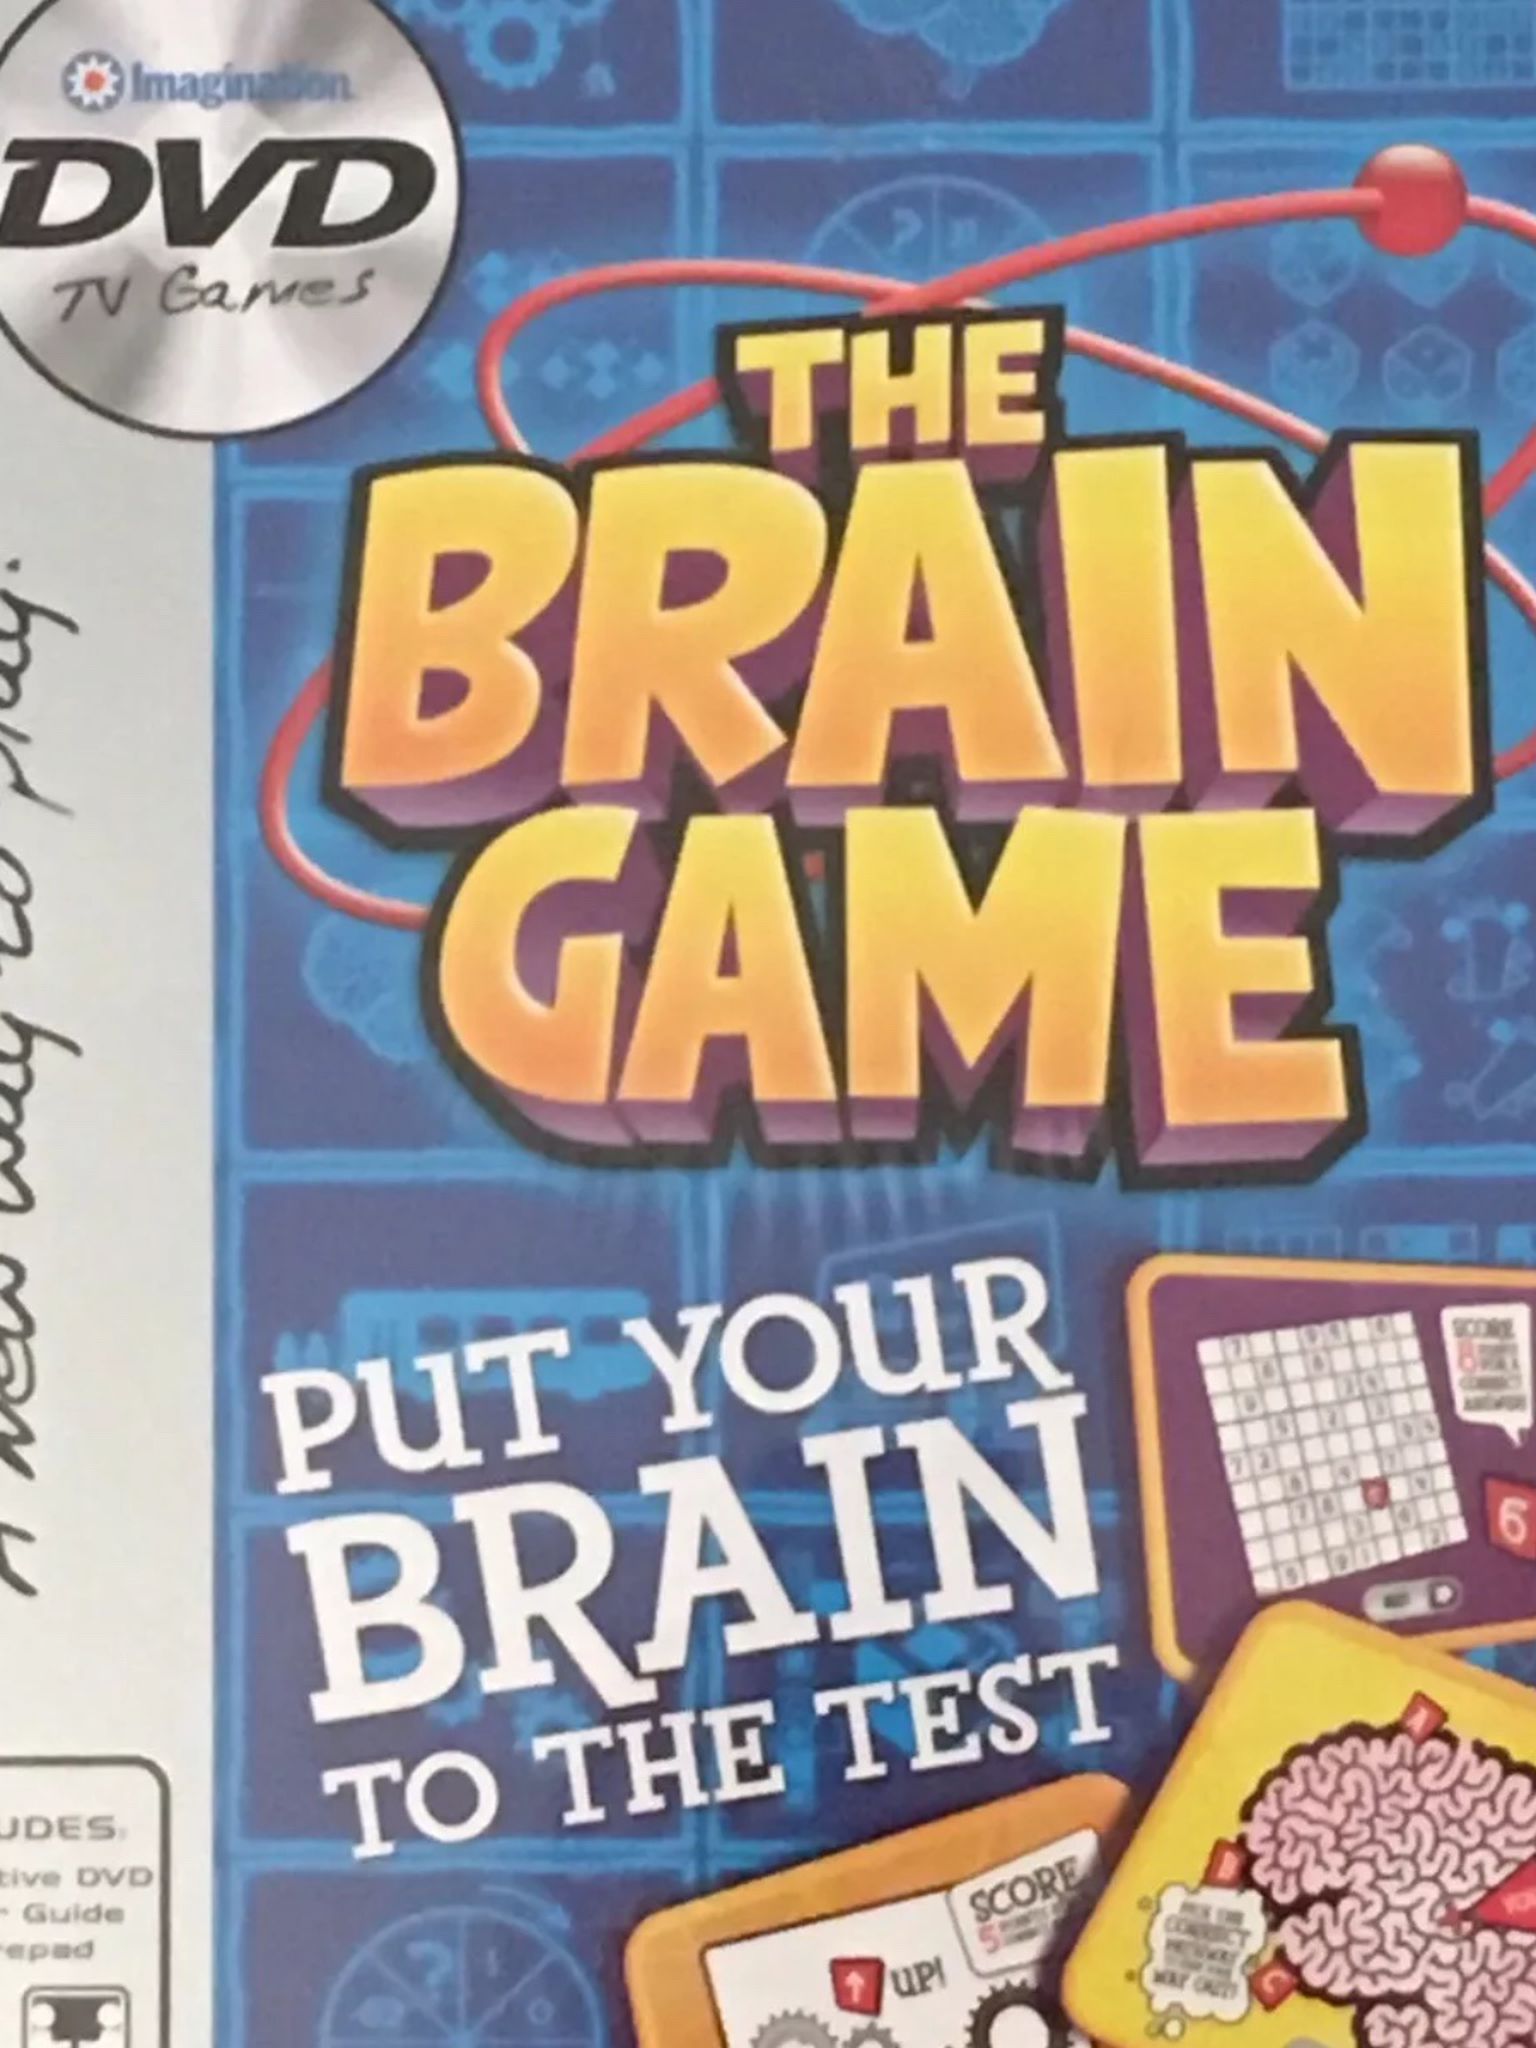 Imagination The Brain Game Interactive Multiplayer DVD TV Games, Sealed